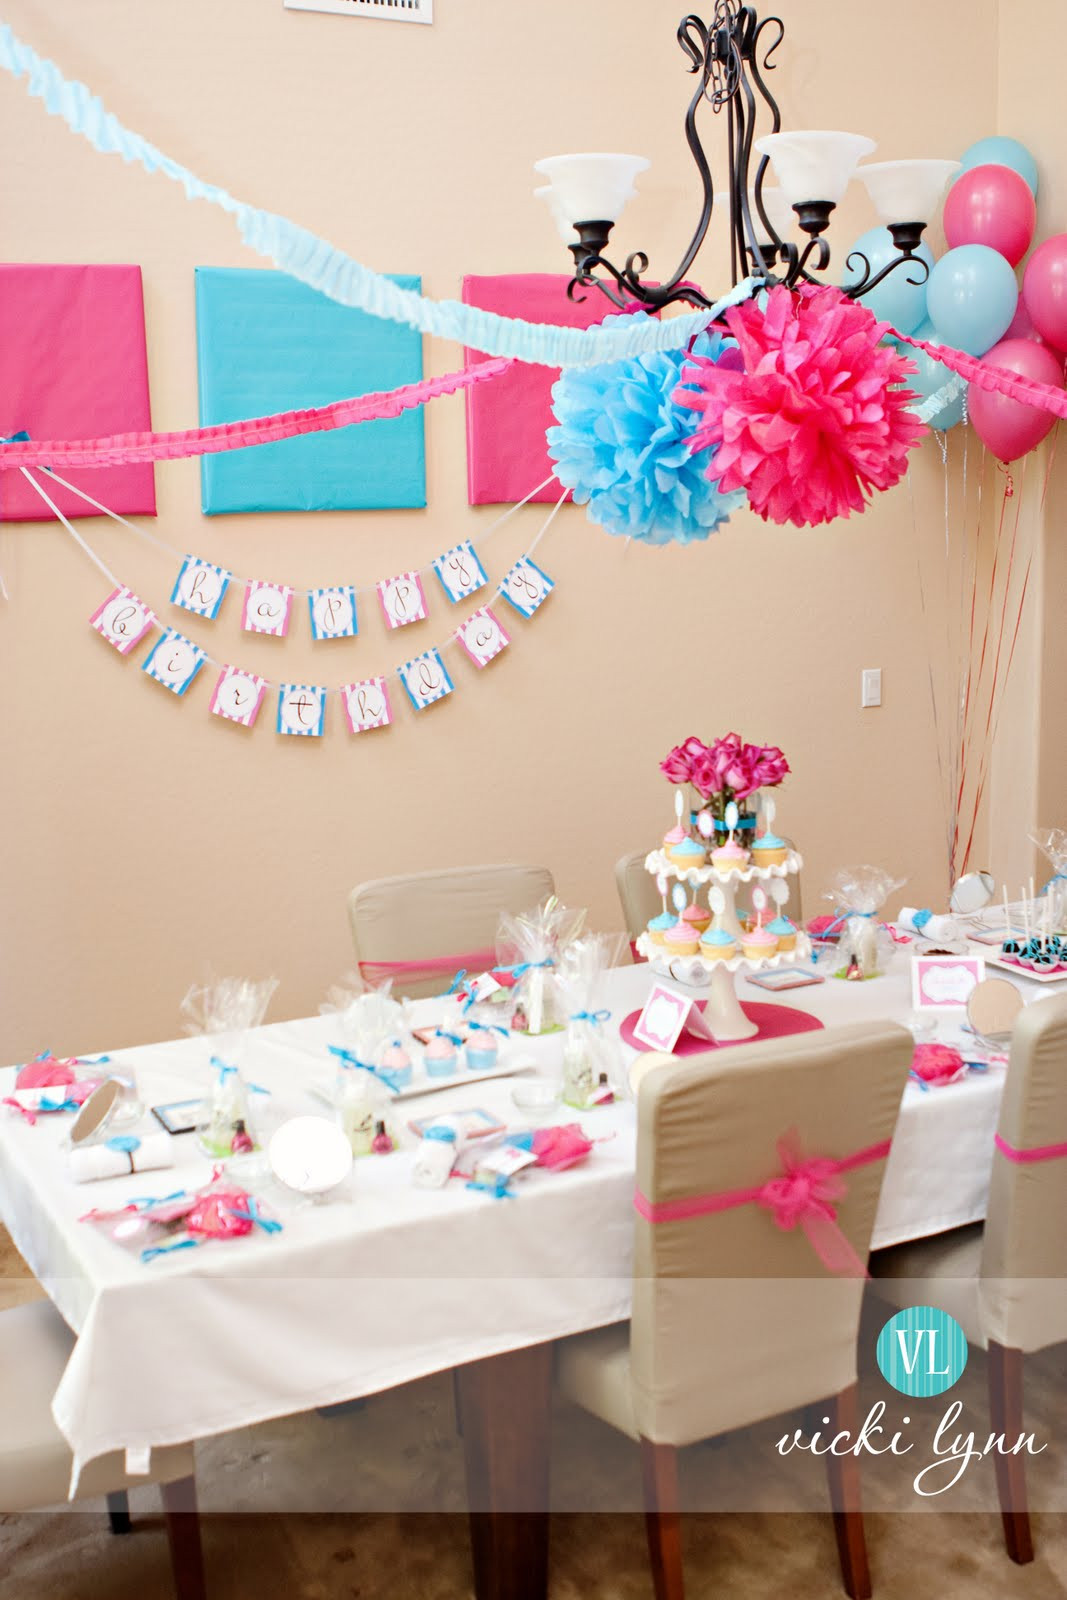 Spa Birthday Party Ideas
 The TomKat Studio Real Parties Sophie s Fabulous Spa